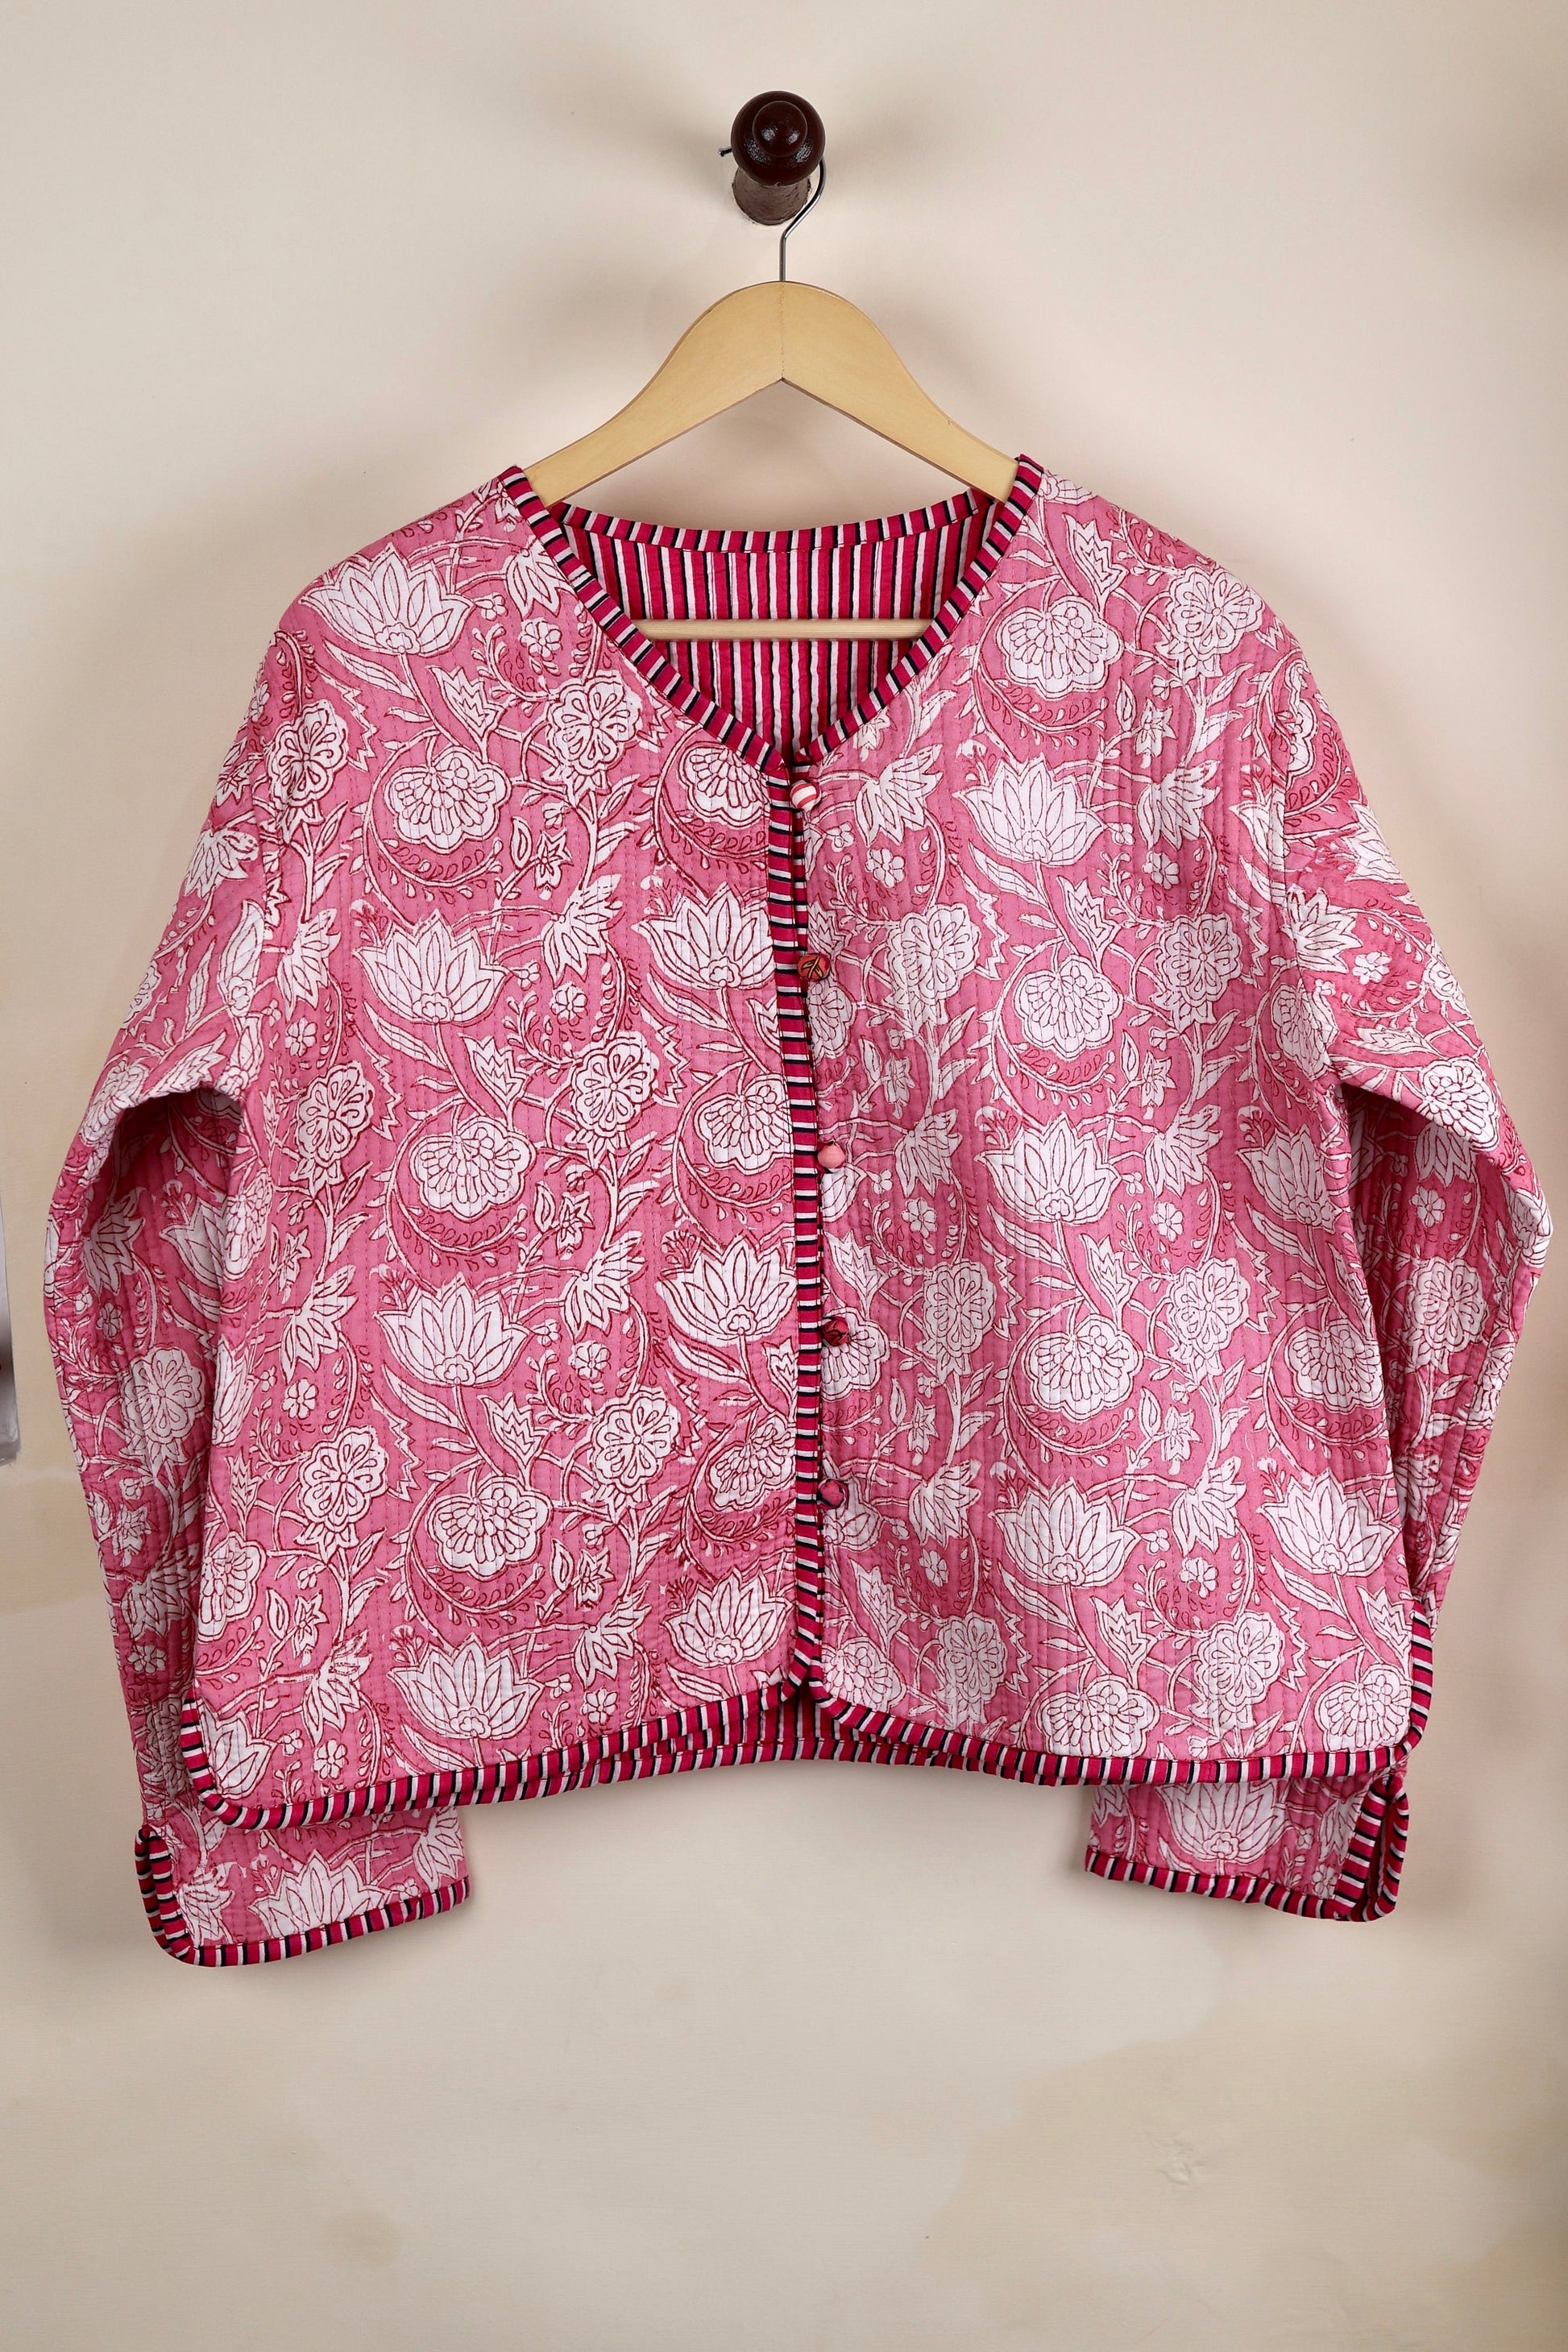 HandBlock Printed Quilted Cotton Jackets | Pink & White Floral Women's Coat | Reversible Bohemian Style Indian Handmade Quilted Jackets